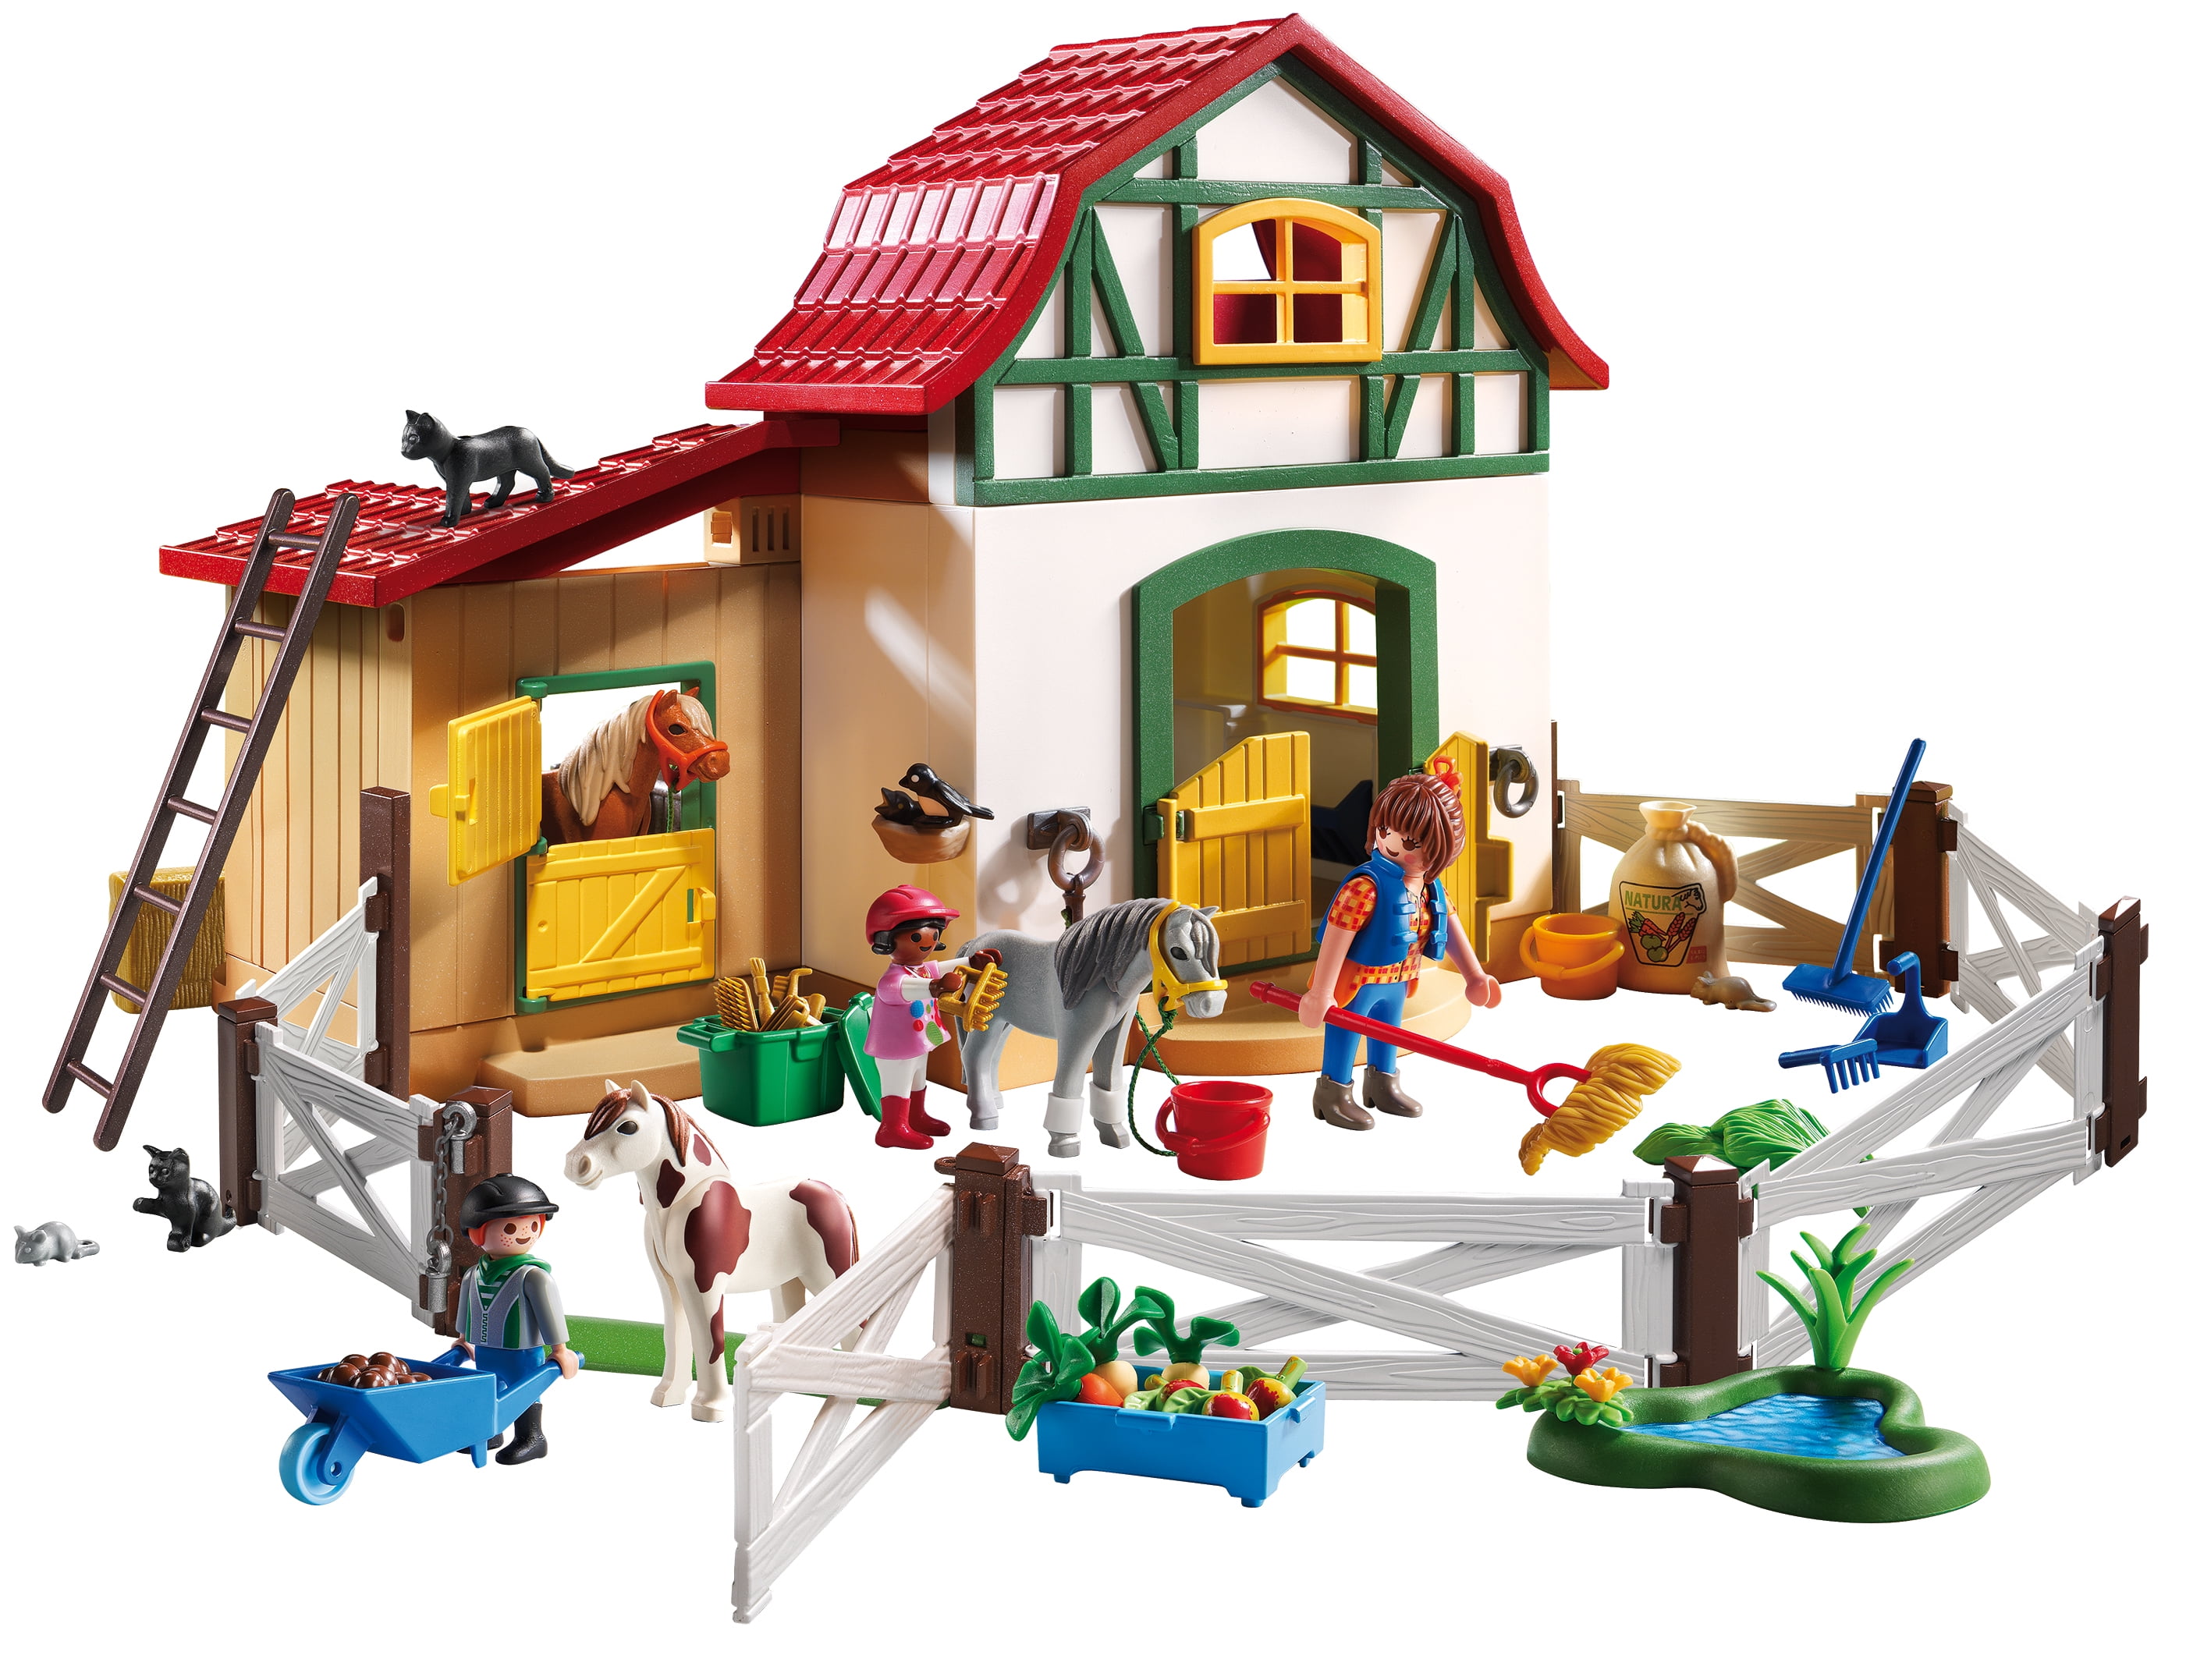 show original title Details about   Sweet Girl with Headscarf Playmobil to Child School Farm Stables PONY 